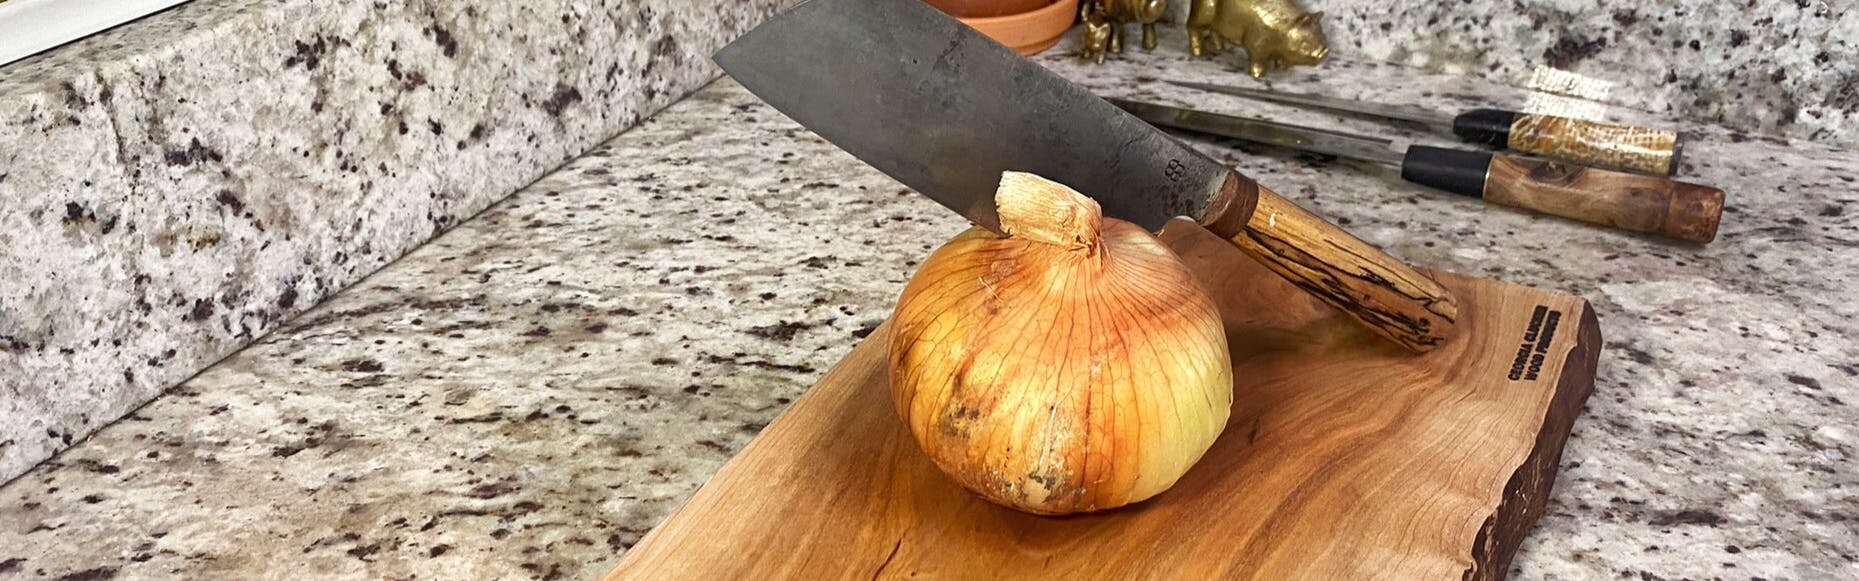 A knife placed into an onion